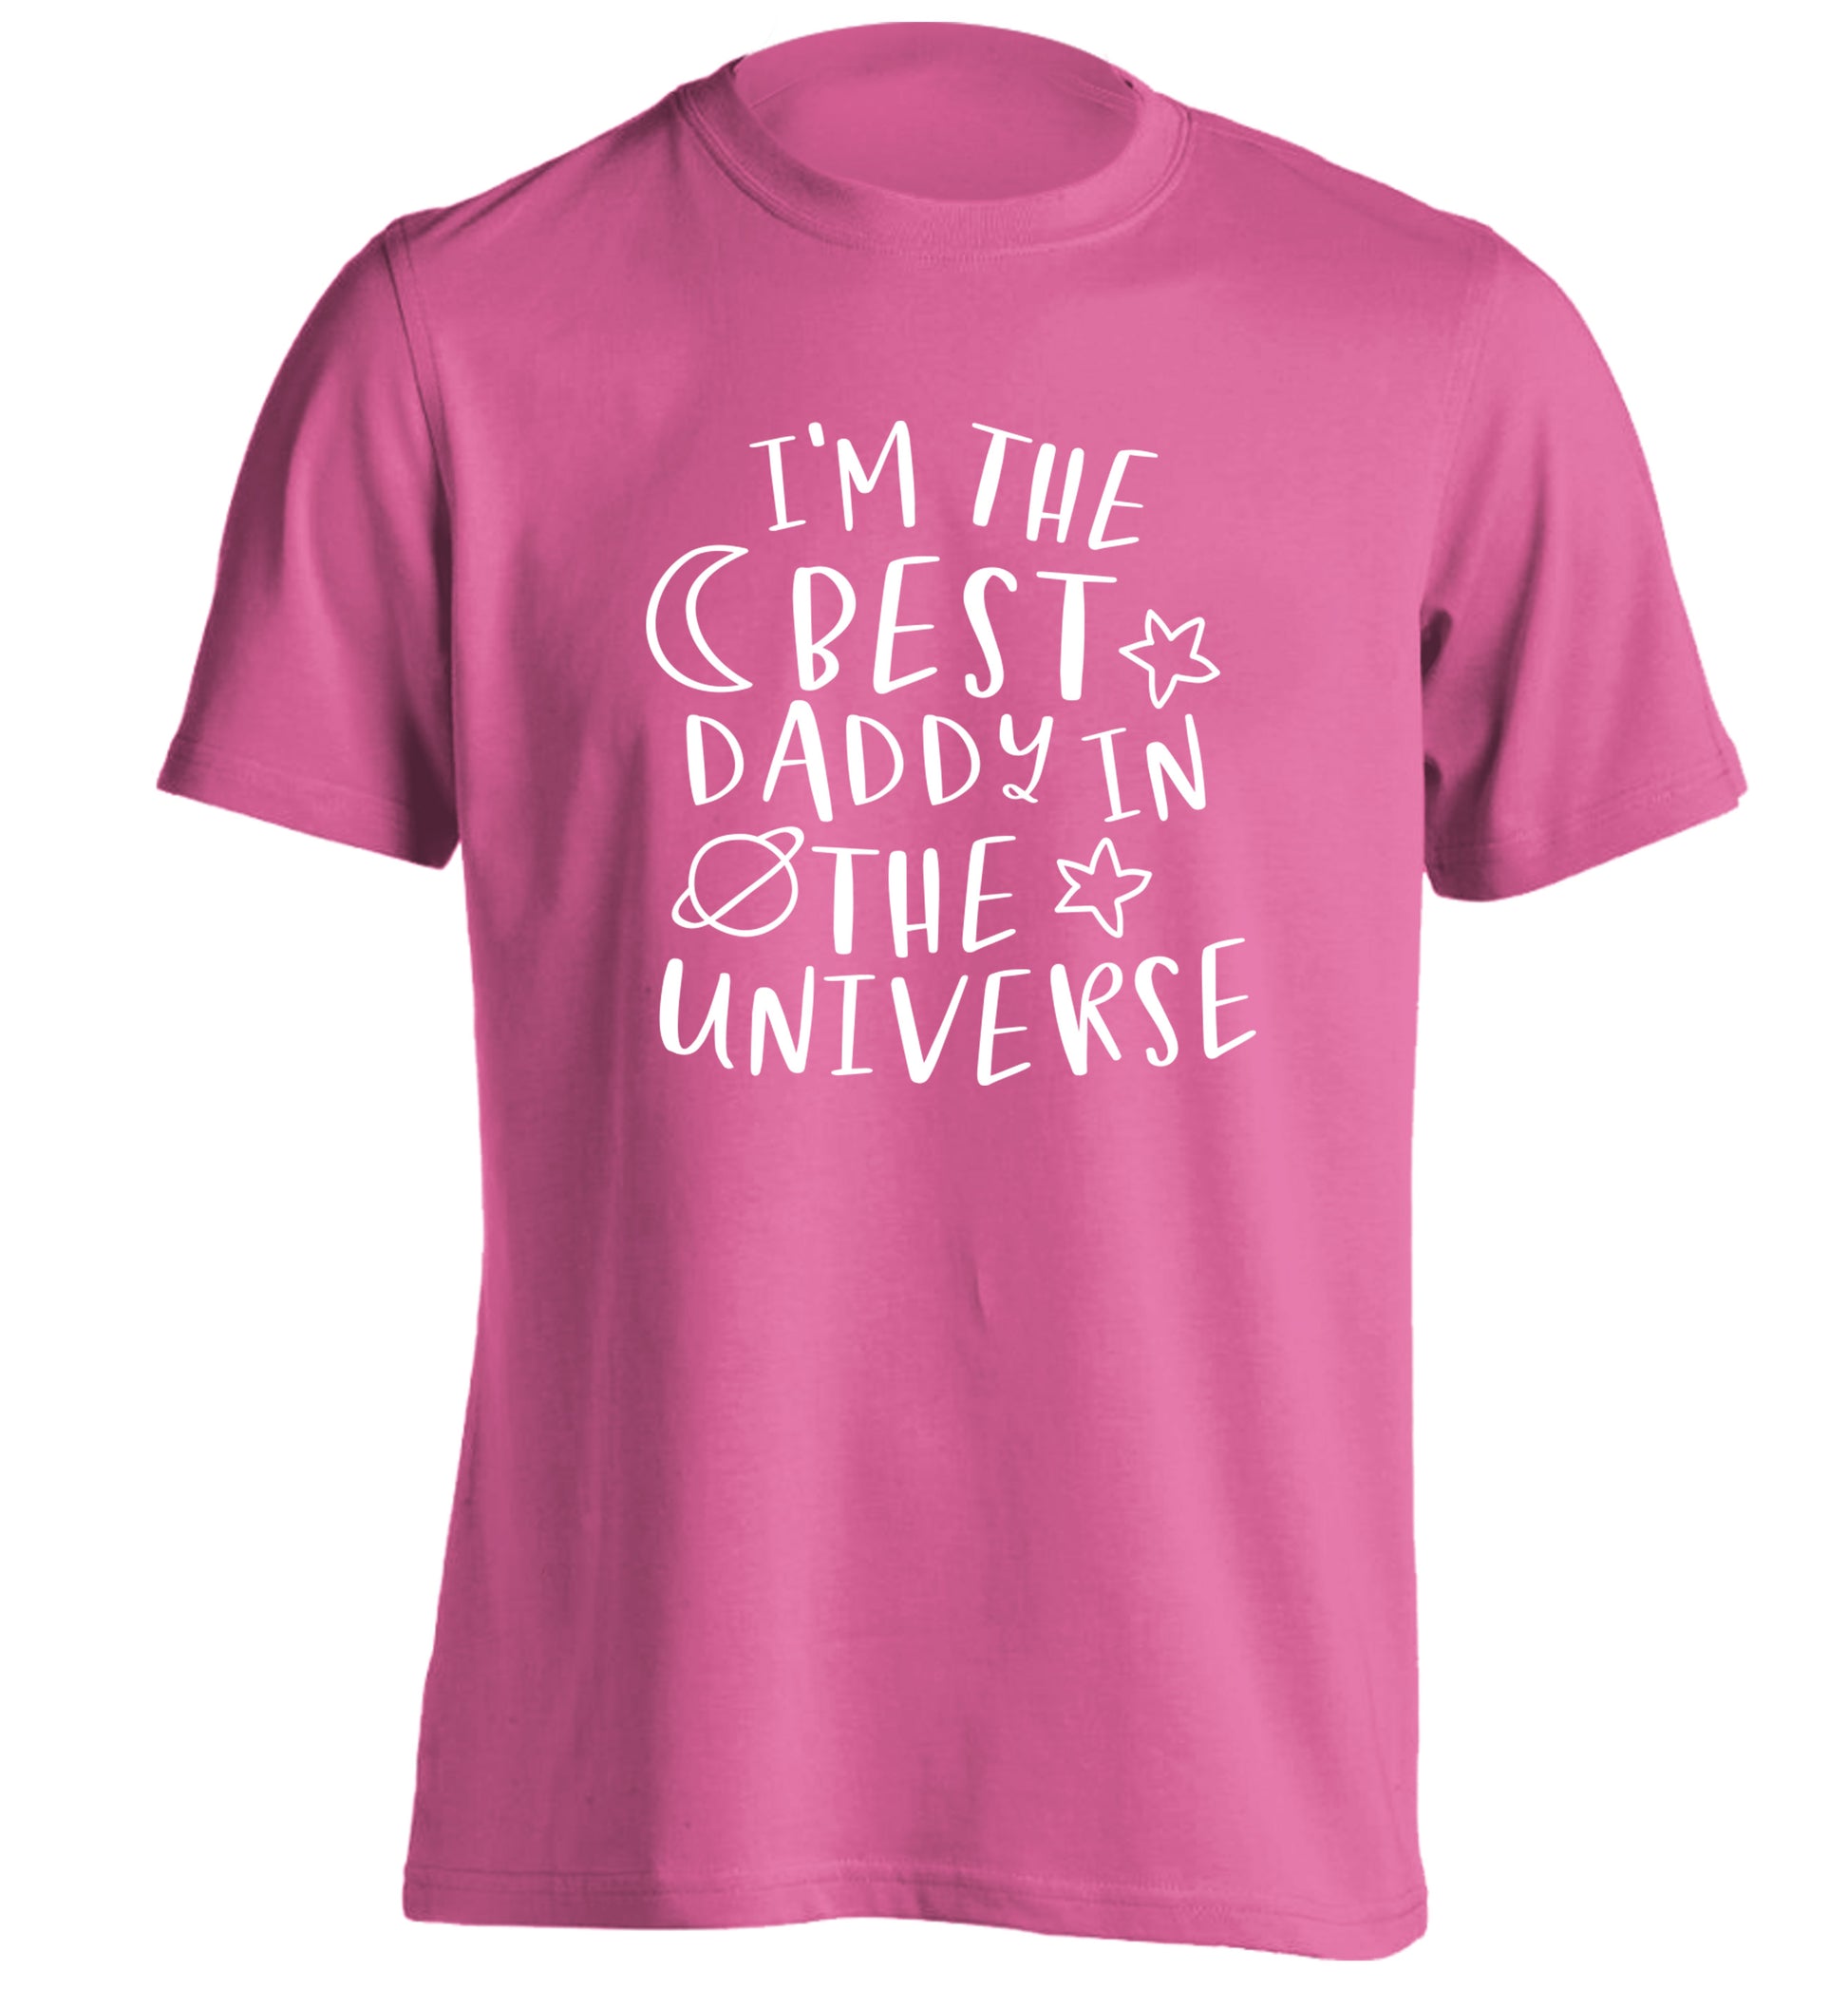 I'm the best daddy in the universe adults unisex pink Tshirt 2XL